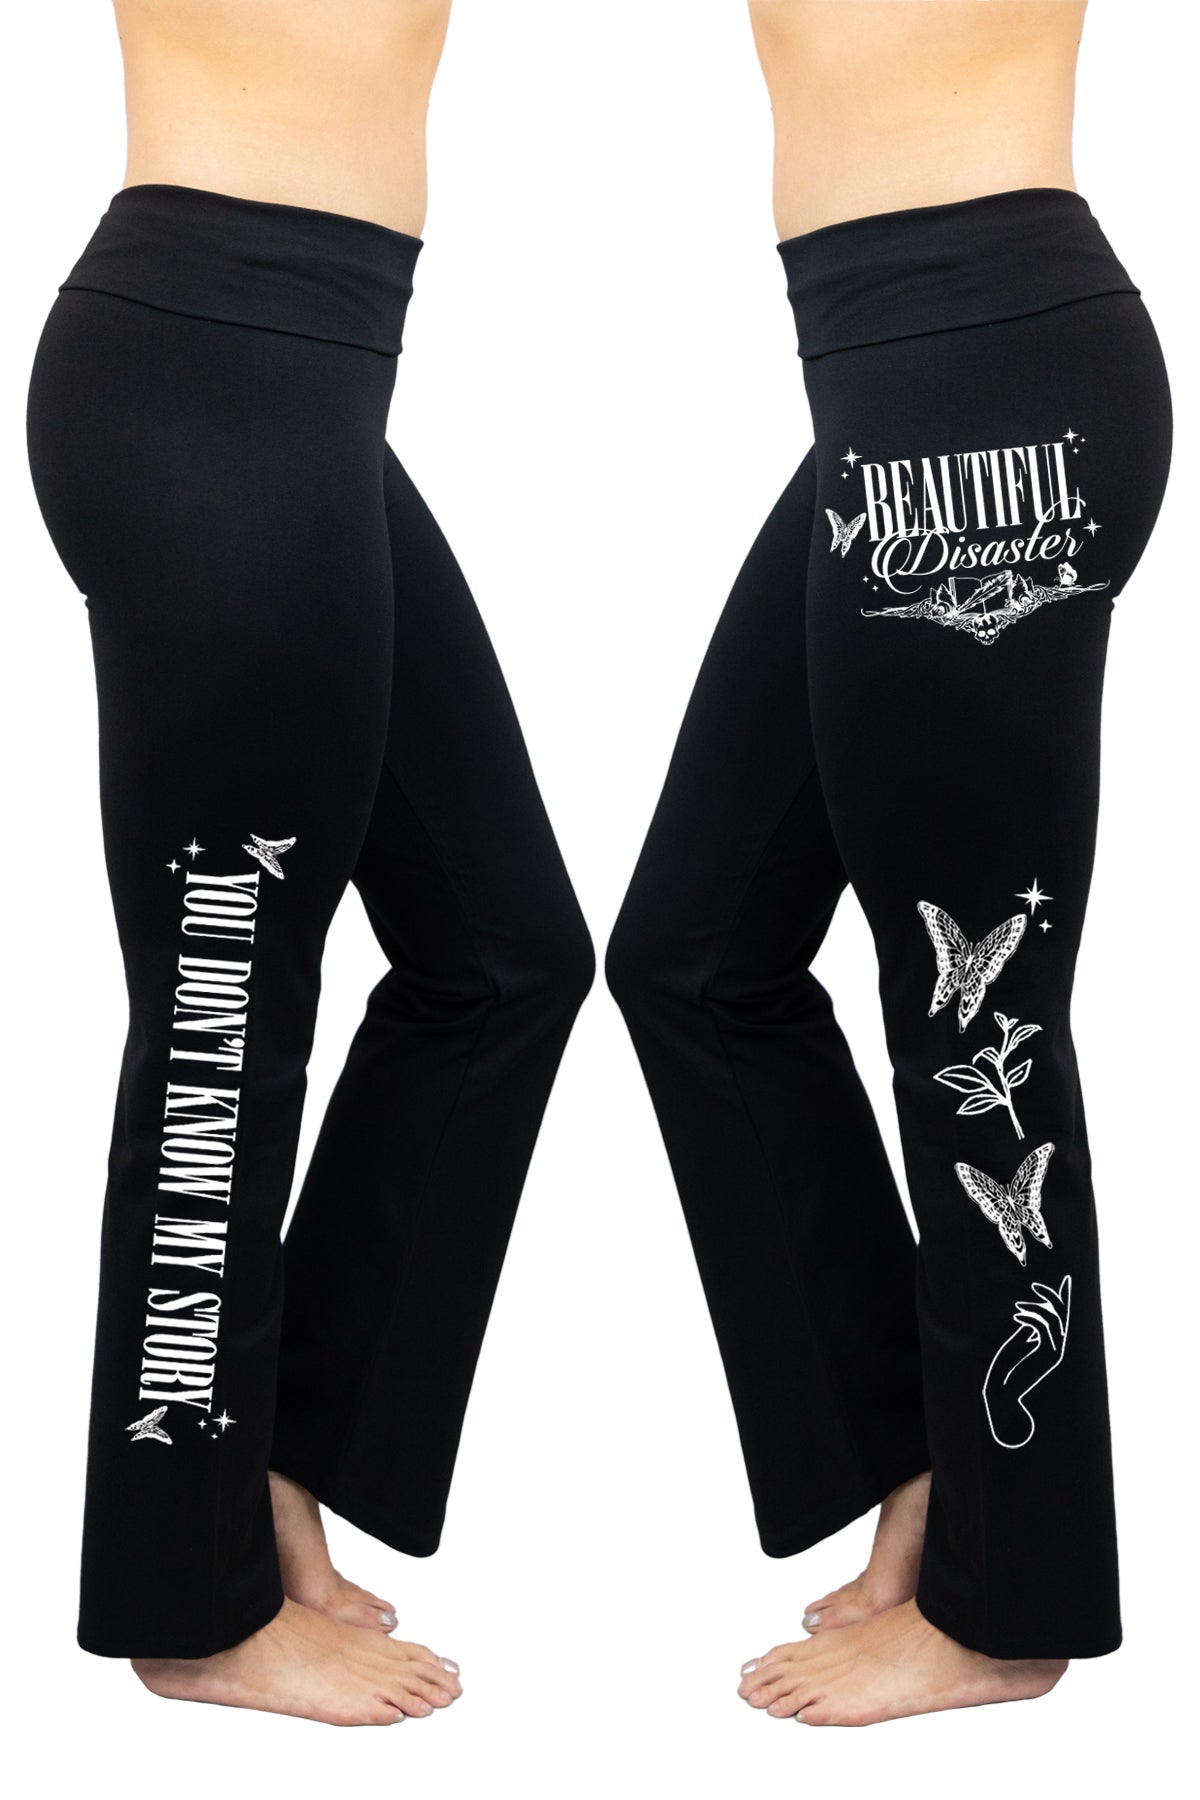 You Don't Know My Story Yoga Pants – Beautiful Disaster Clothing